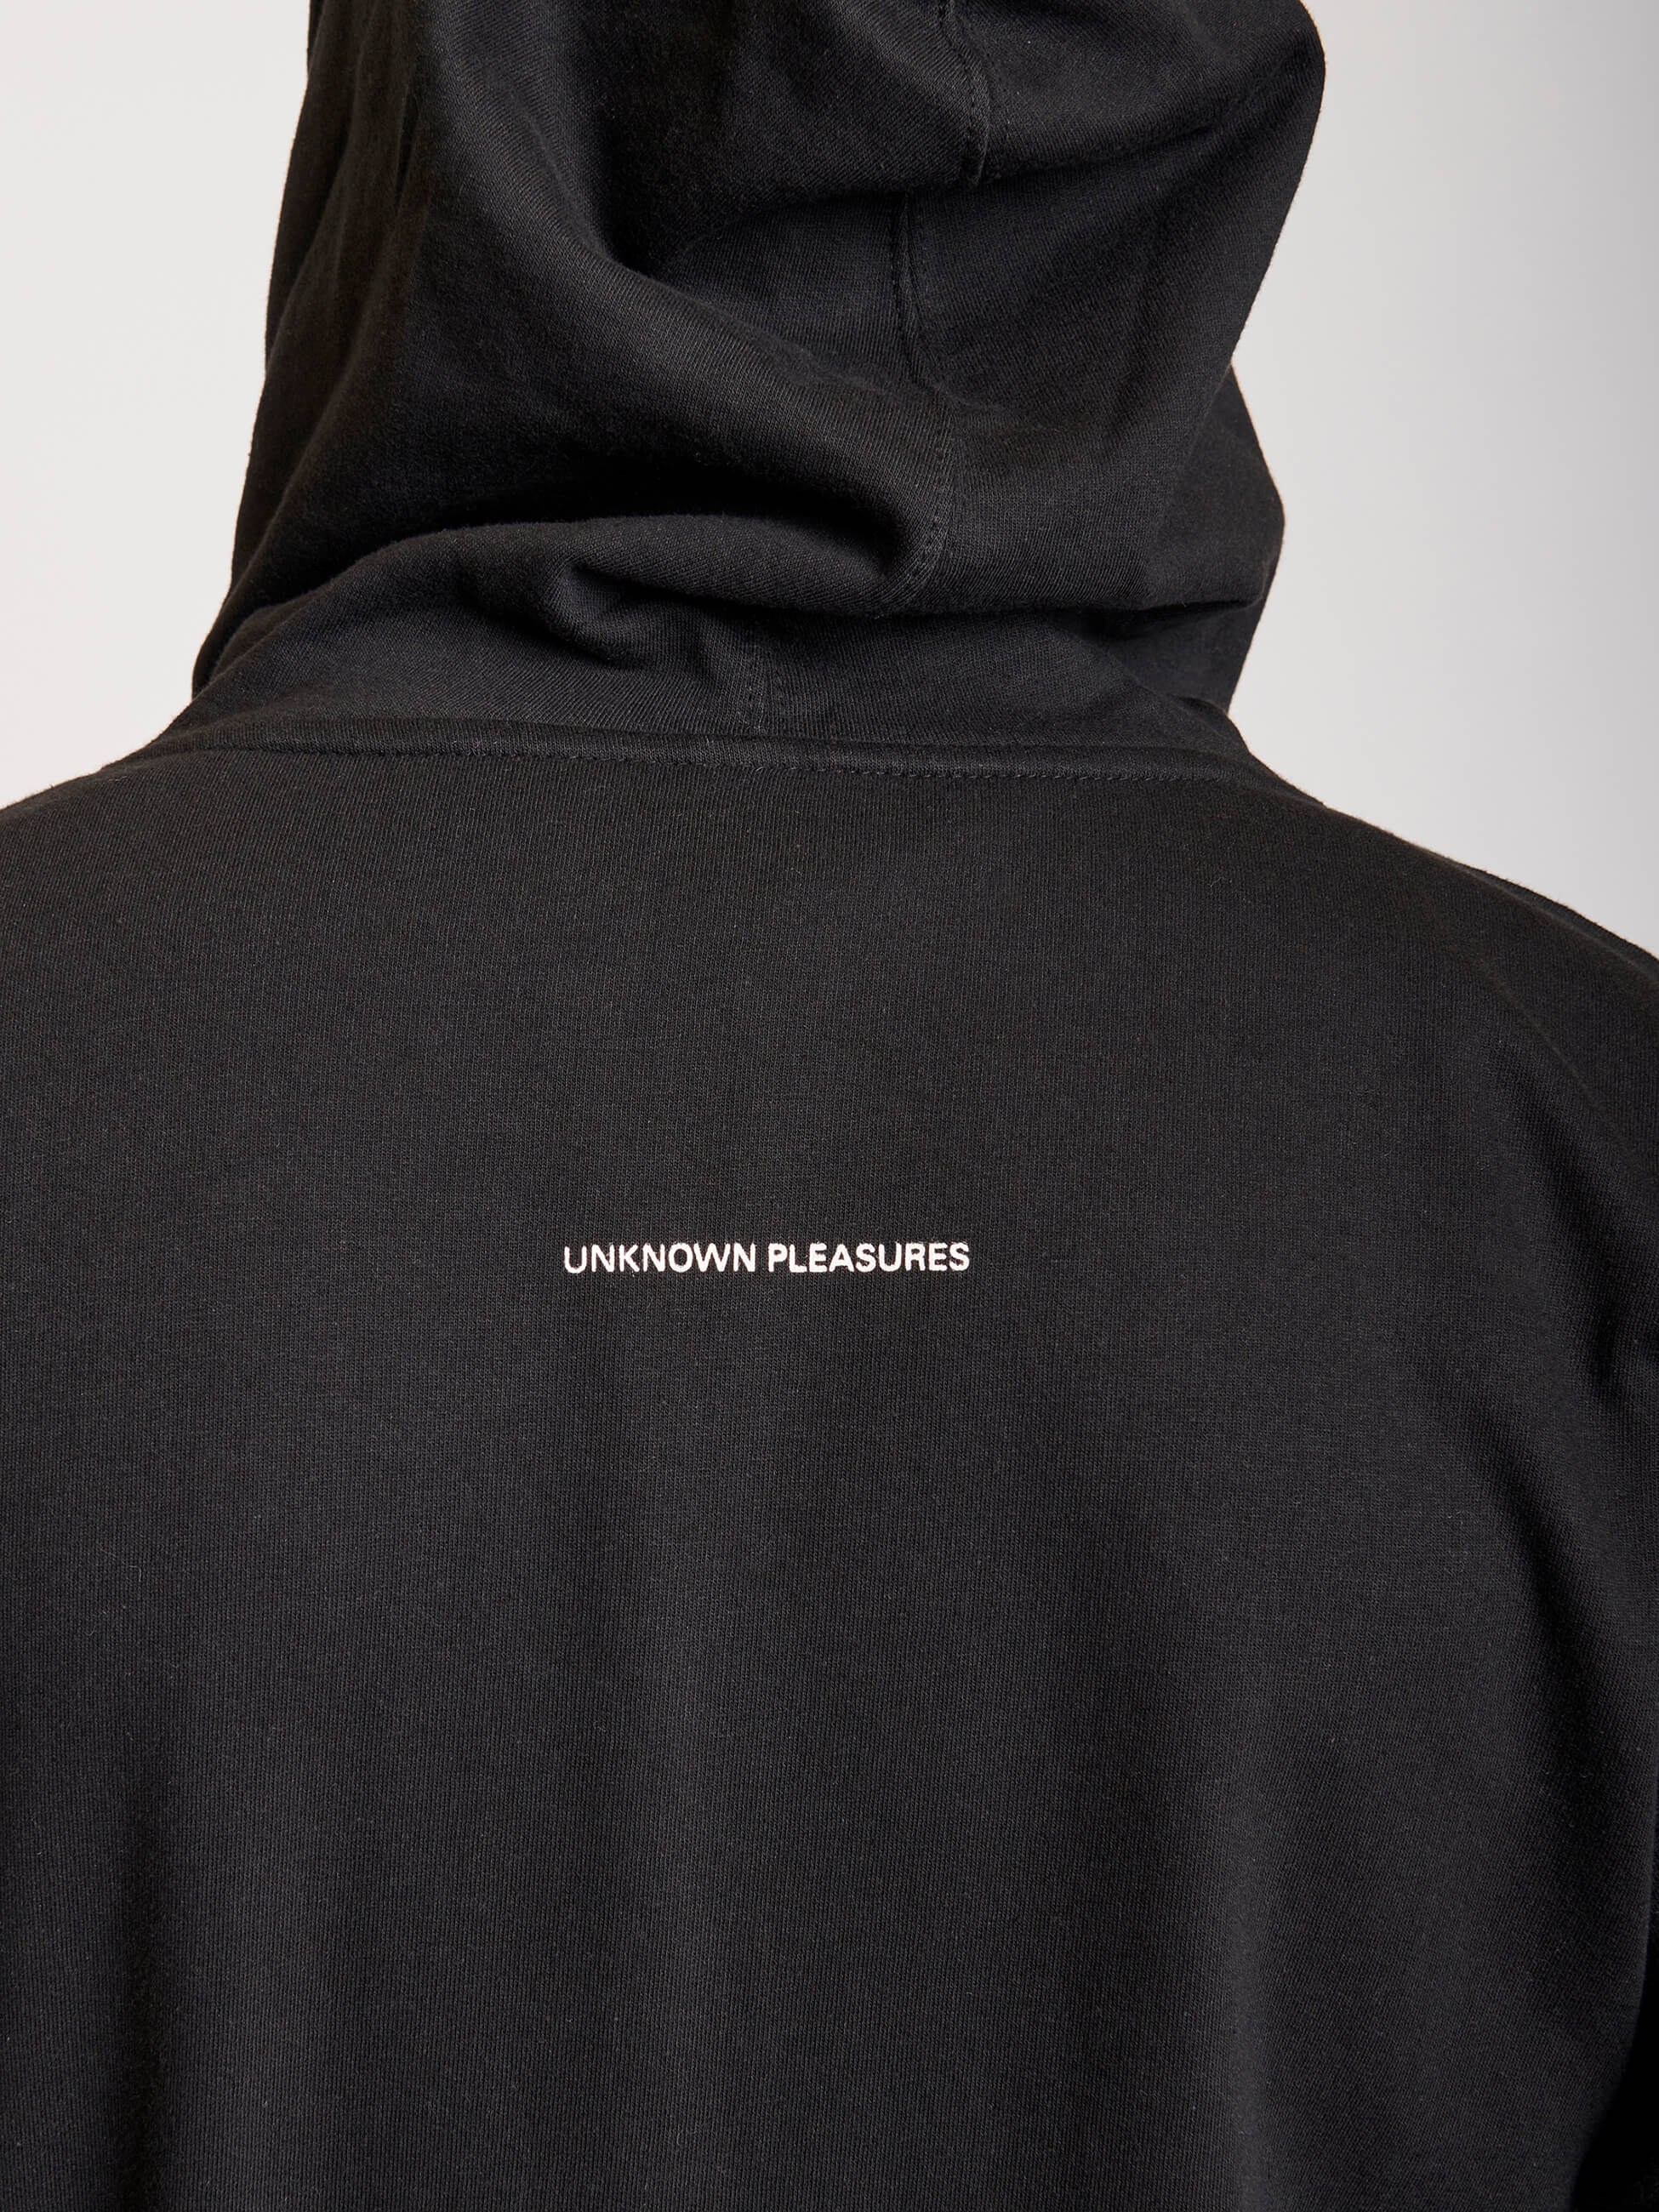 black zip hoodie with white graphics on front